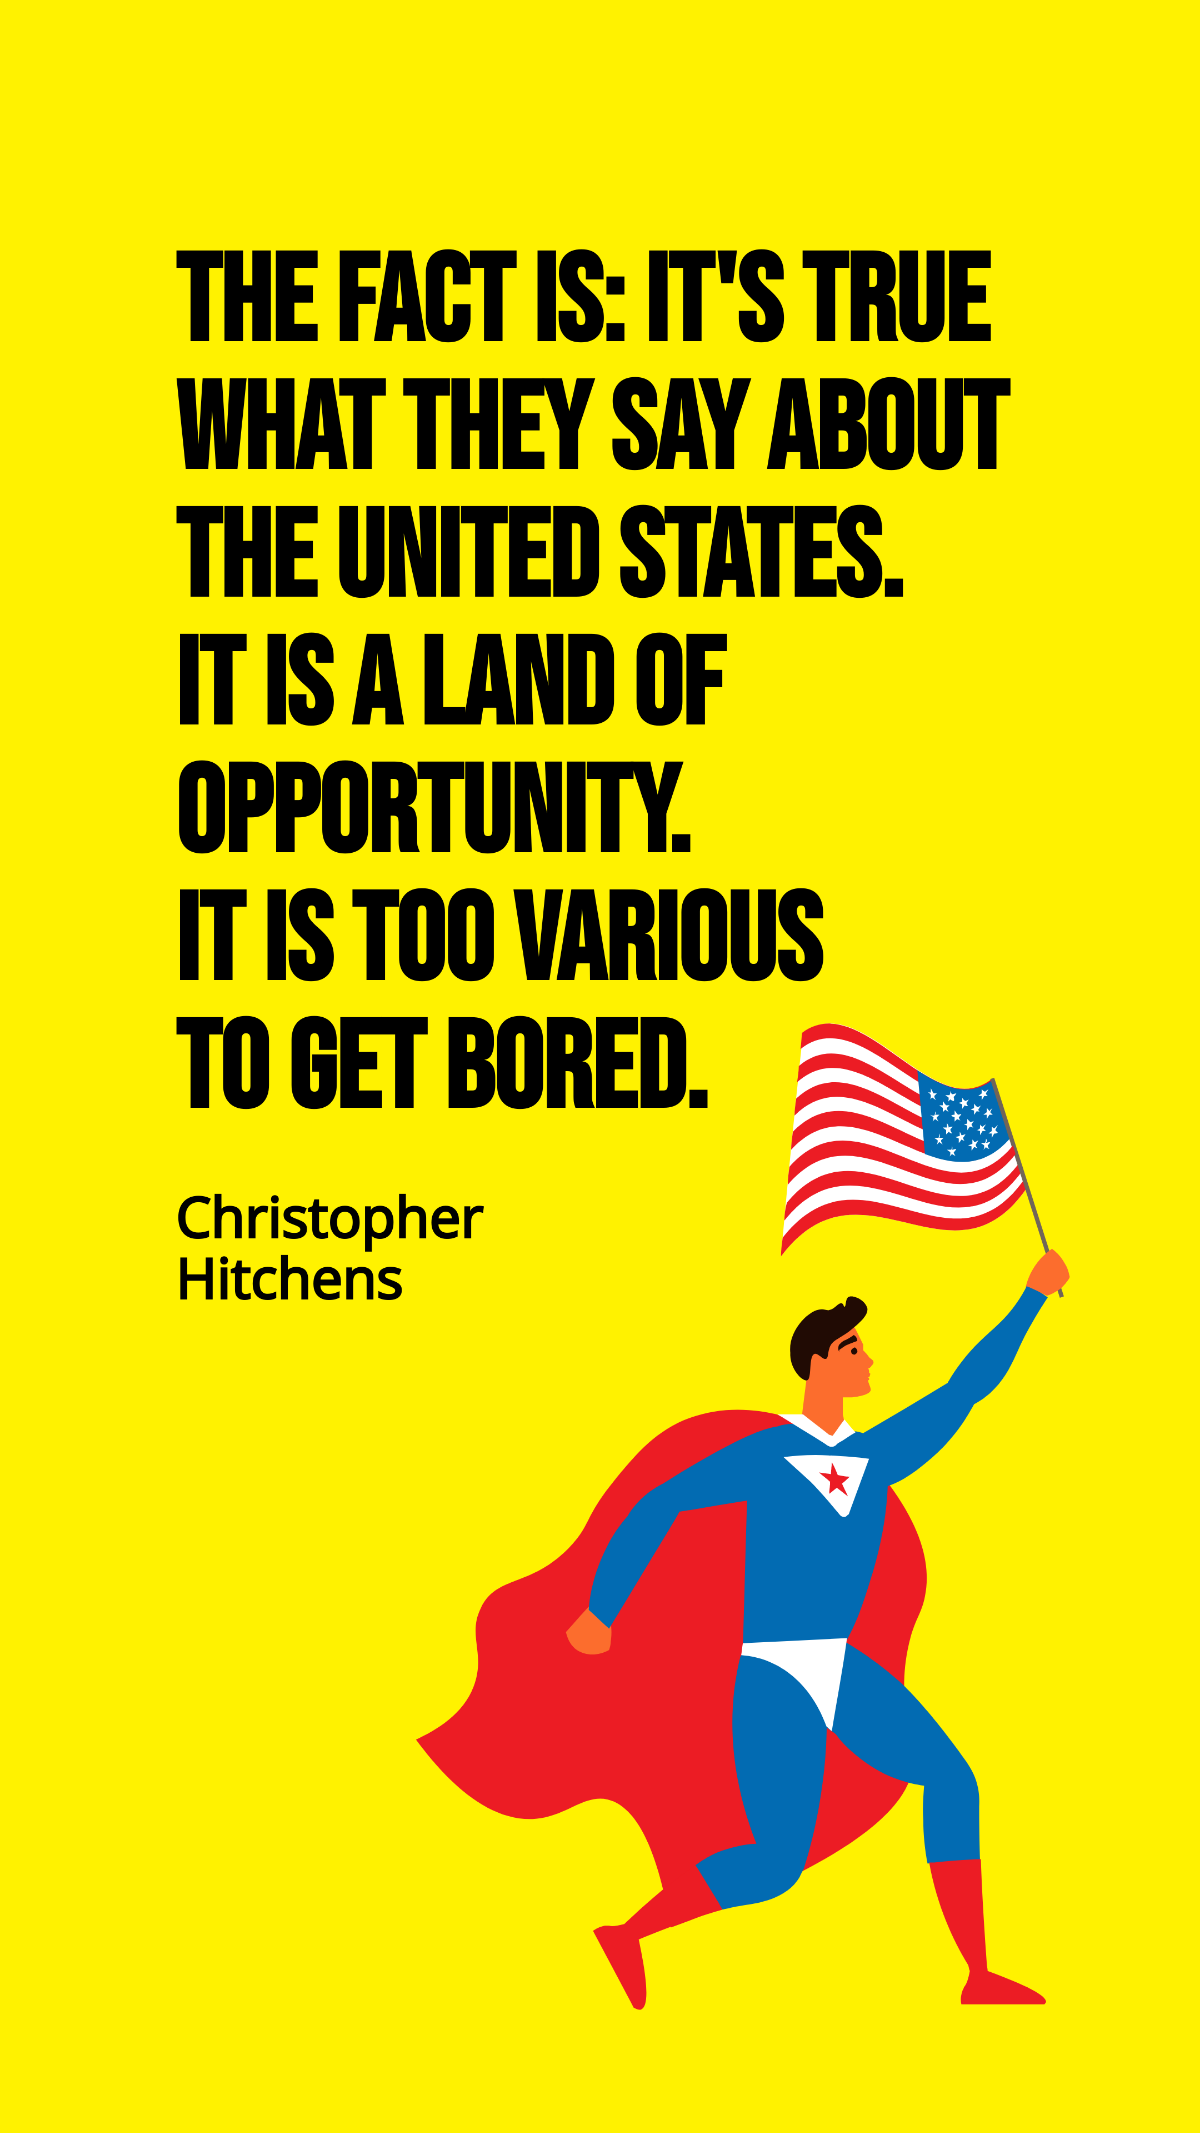 Christopher Hitchens - The fact is: It's true what they say about the United States. It is a land of opportunity. It is too various to get bored